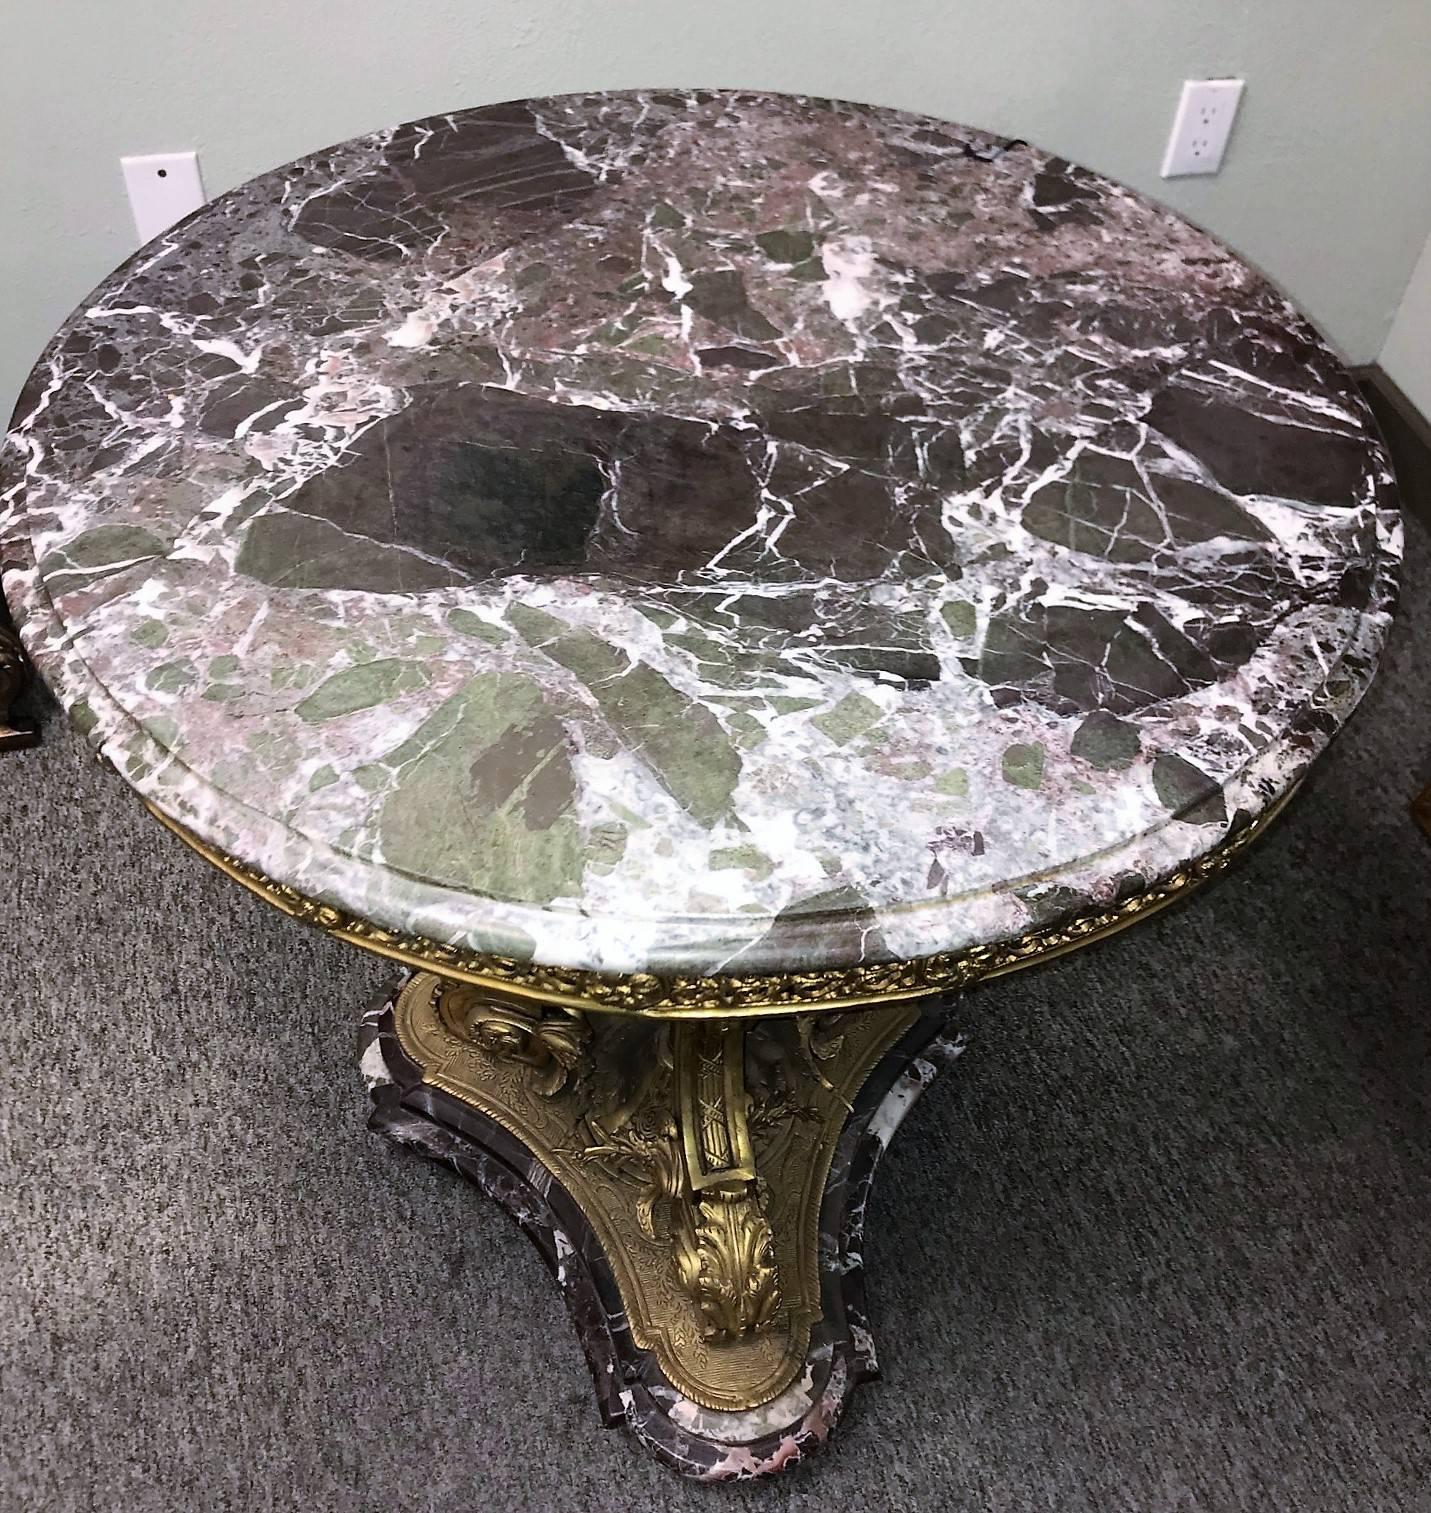 Outstanding quality antique French Rococo style side table or centre table with a gorgeous marble top in variegated colors of rouge, white and black. A finely detailed bronze filigree apron with spaced rosettes surrounds the top.

The shaped